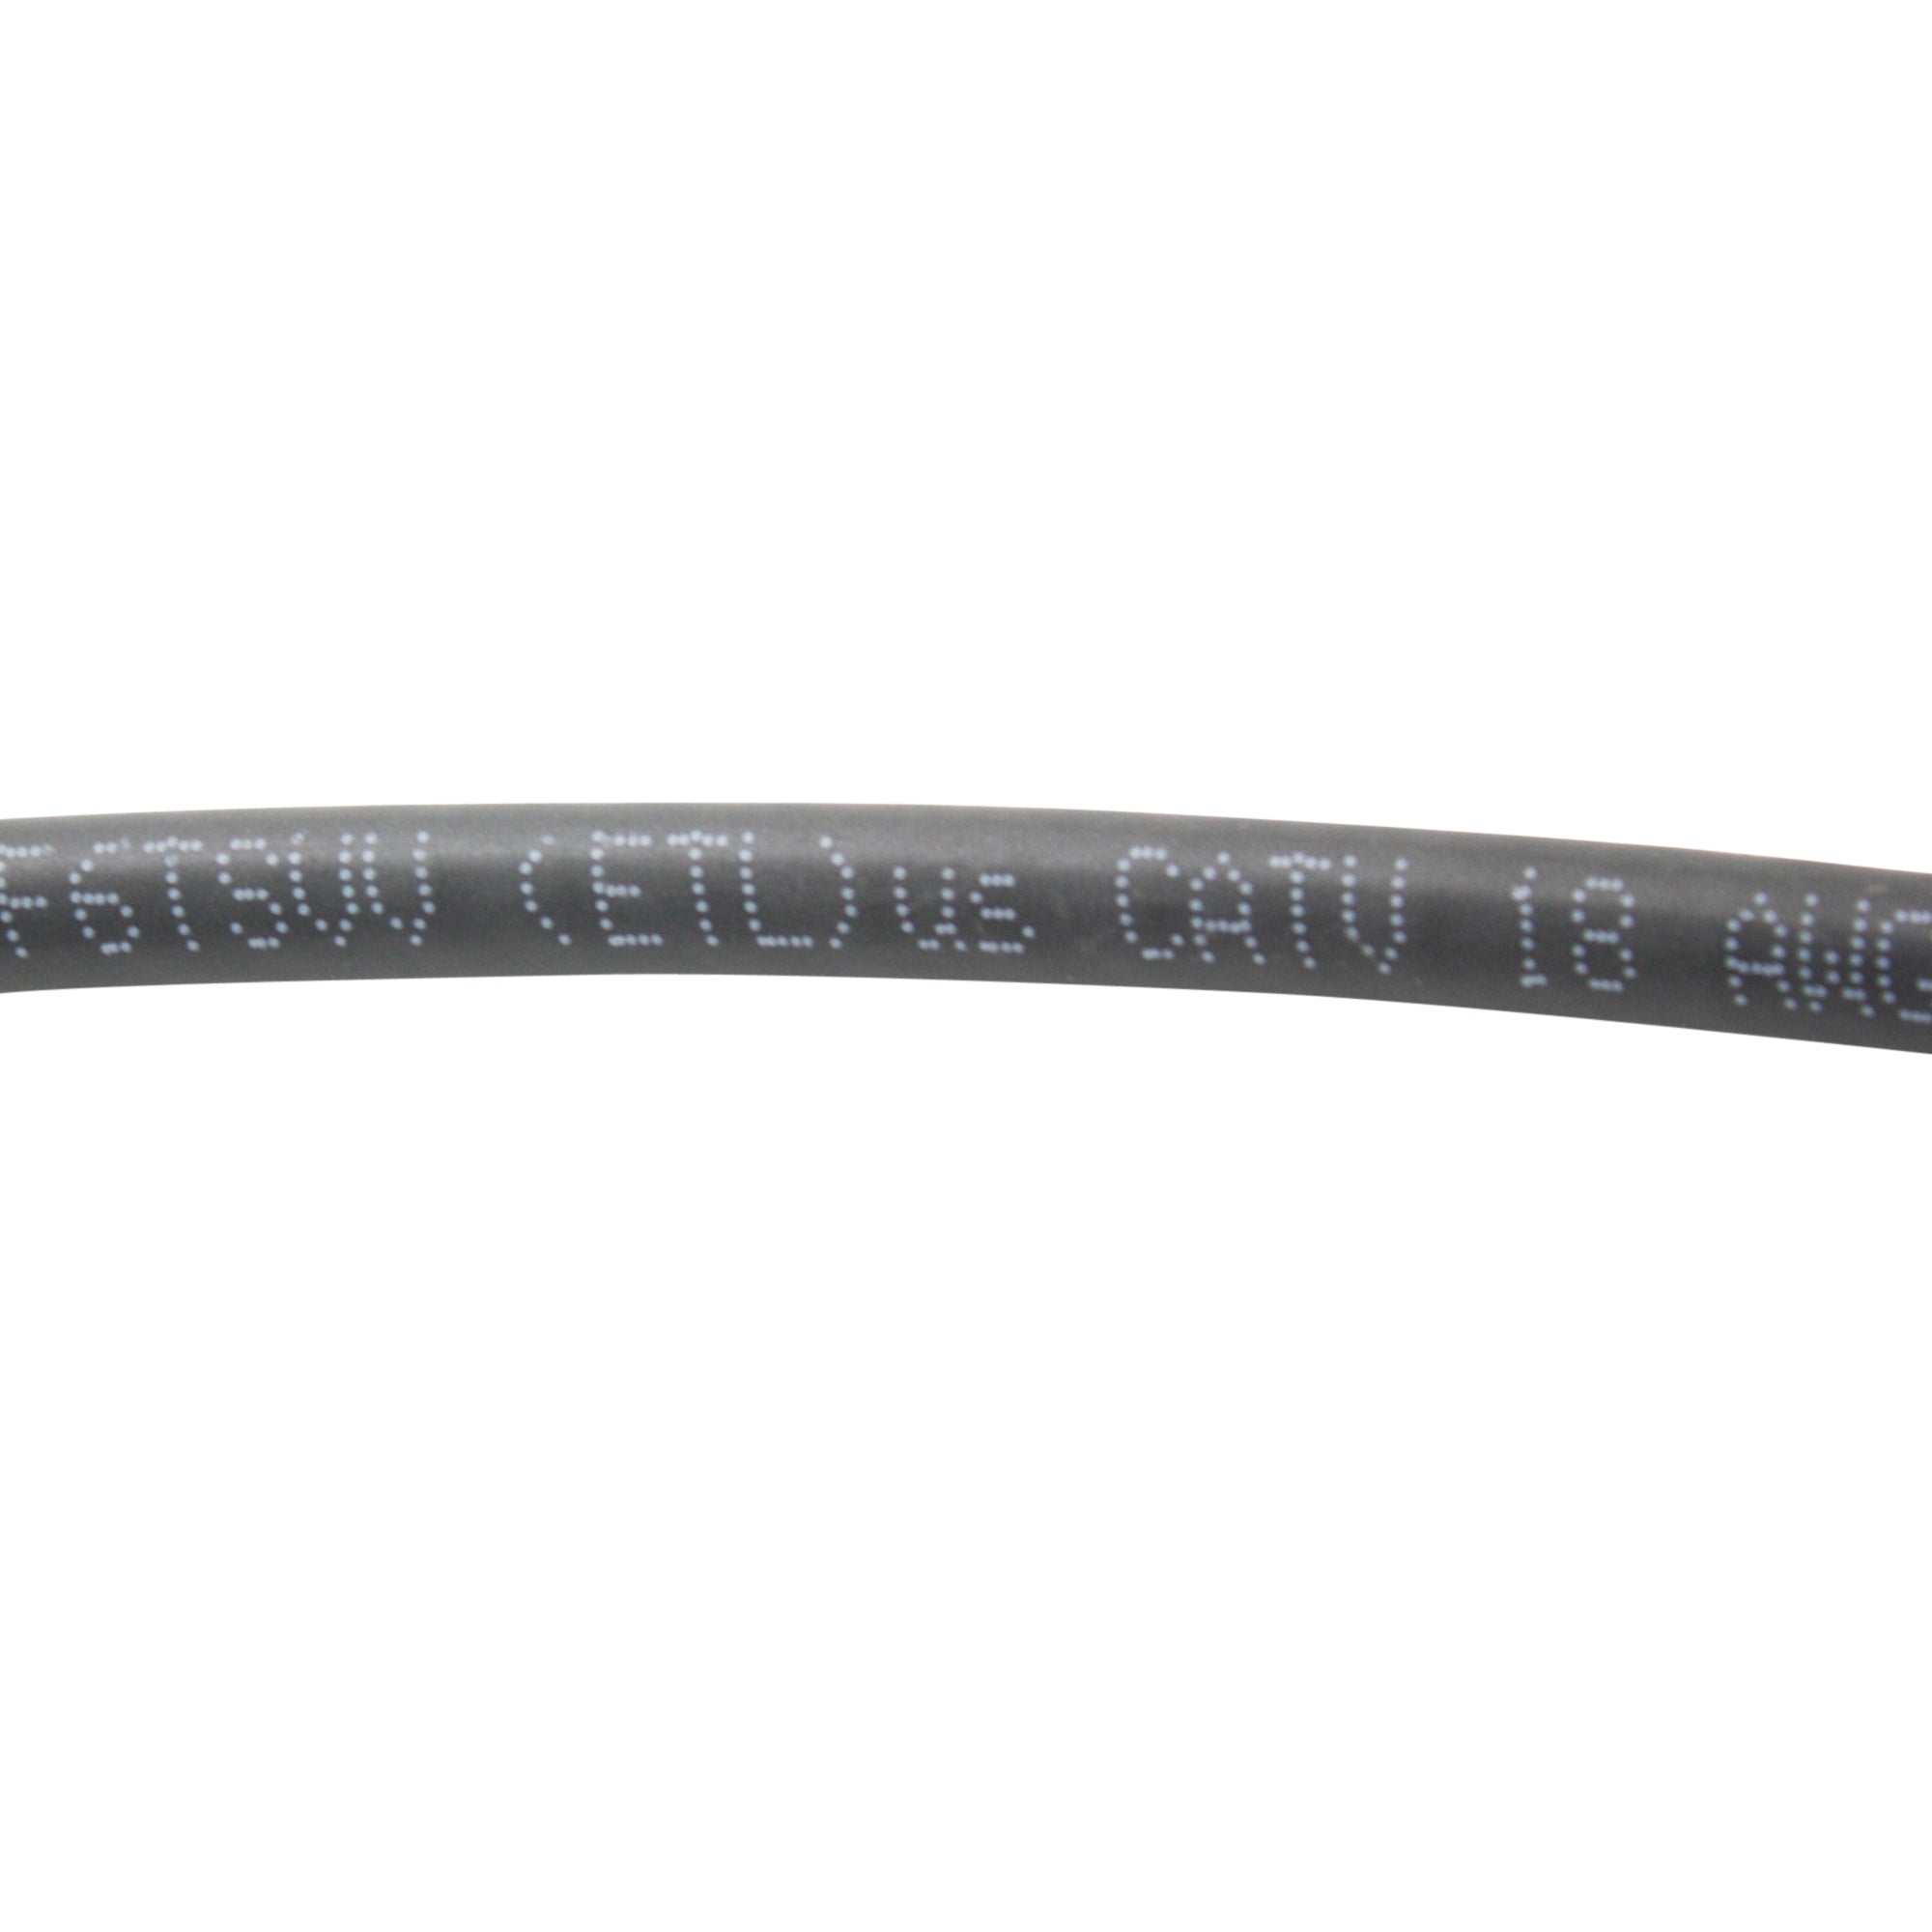 Commscope, COMMSCOPE F6SSVV-GV3903262 75 OHM COAXIAL CABLE CATV (ETL), 18 AWG, DROP CABLE